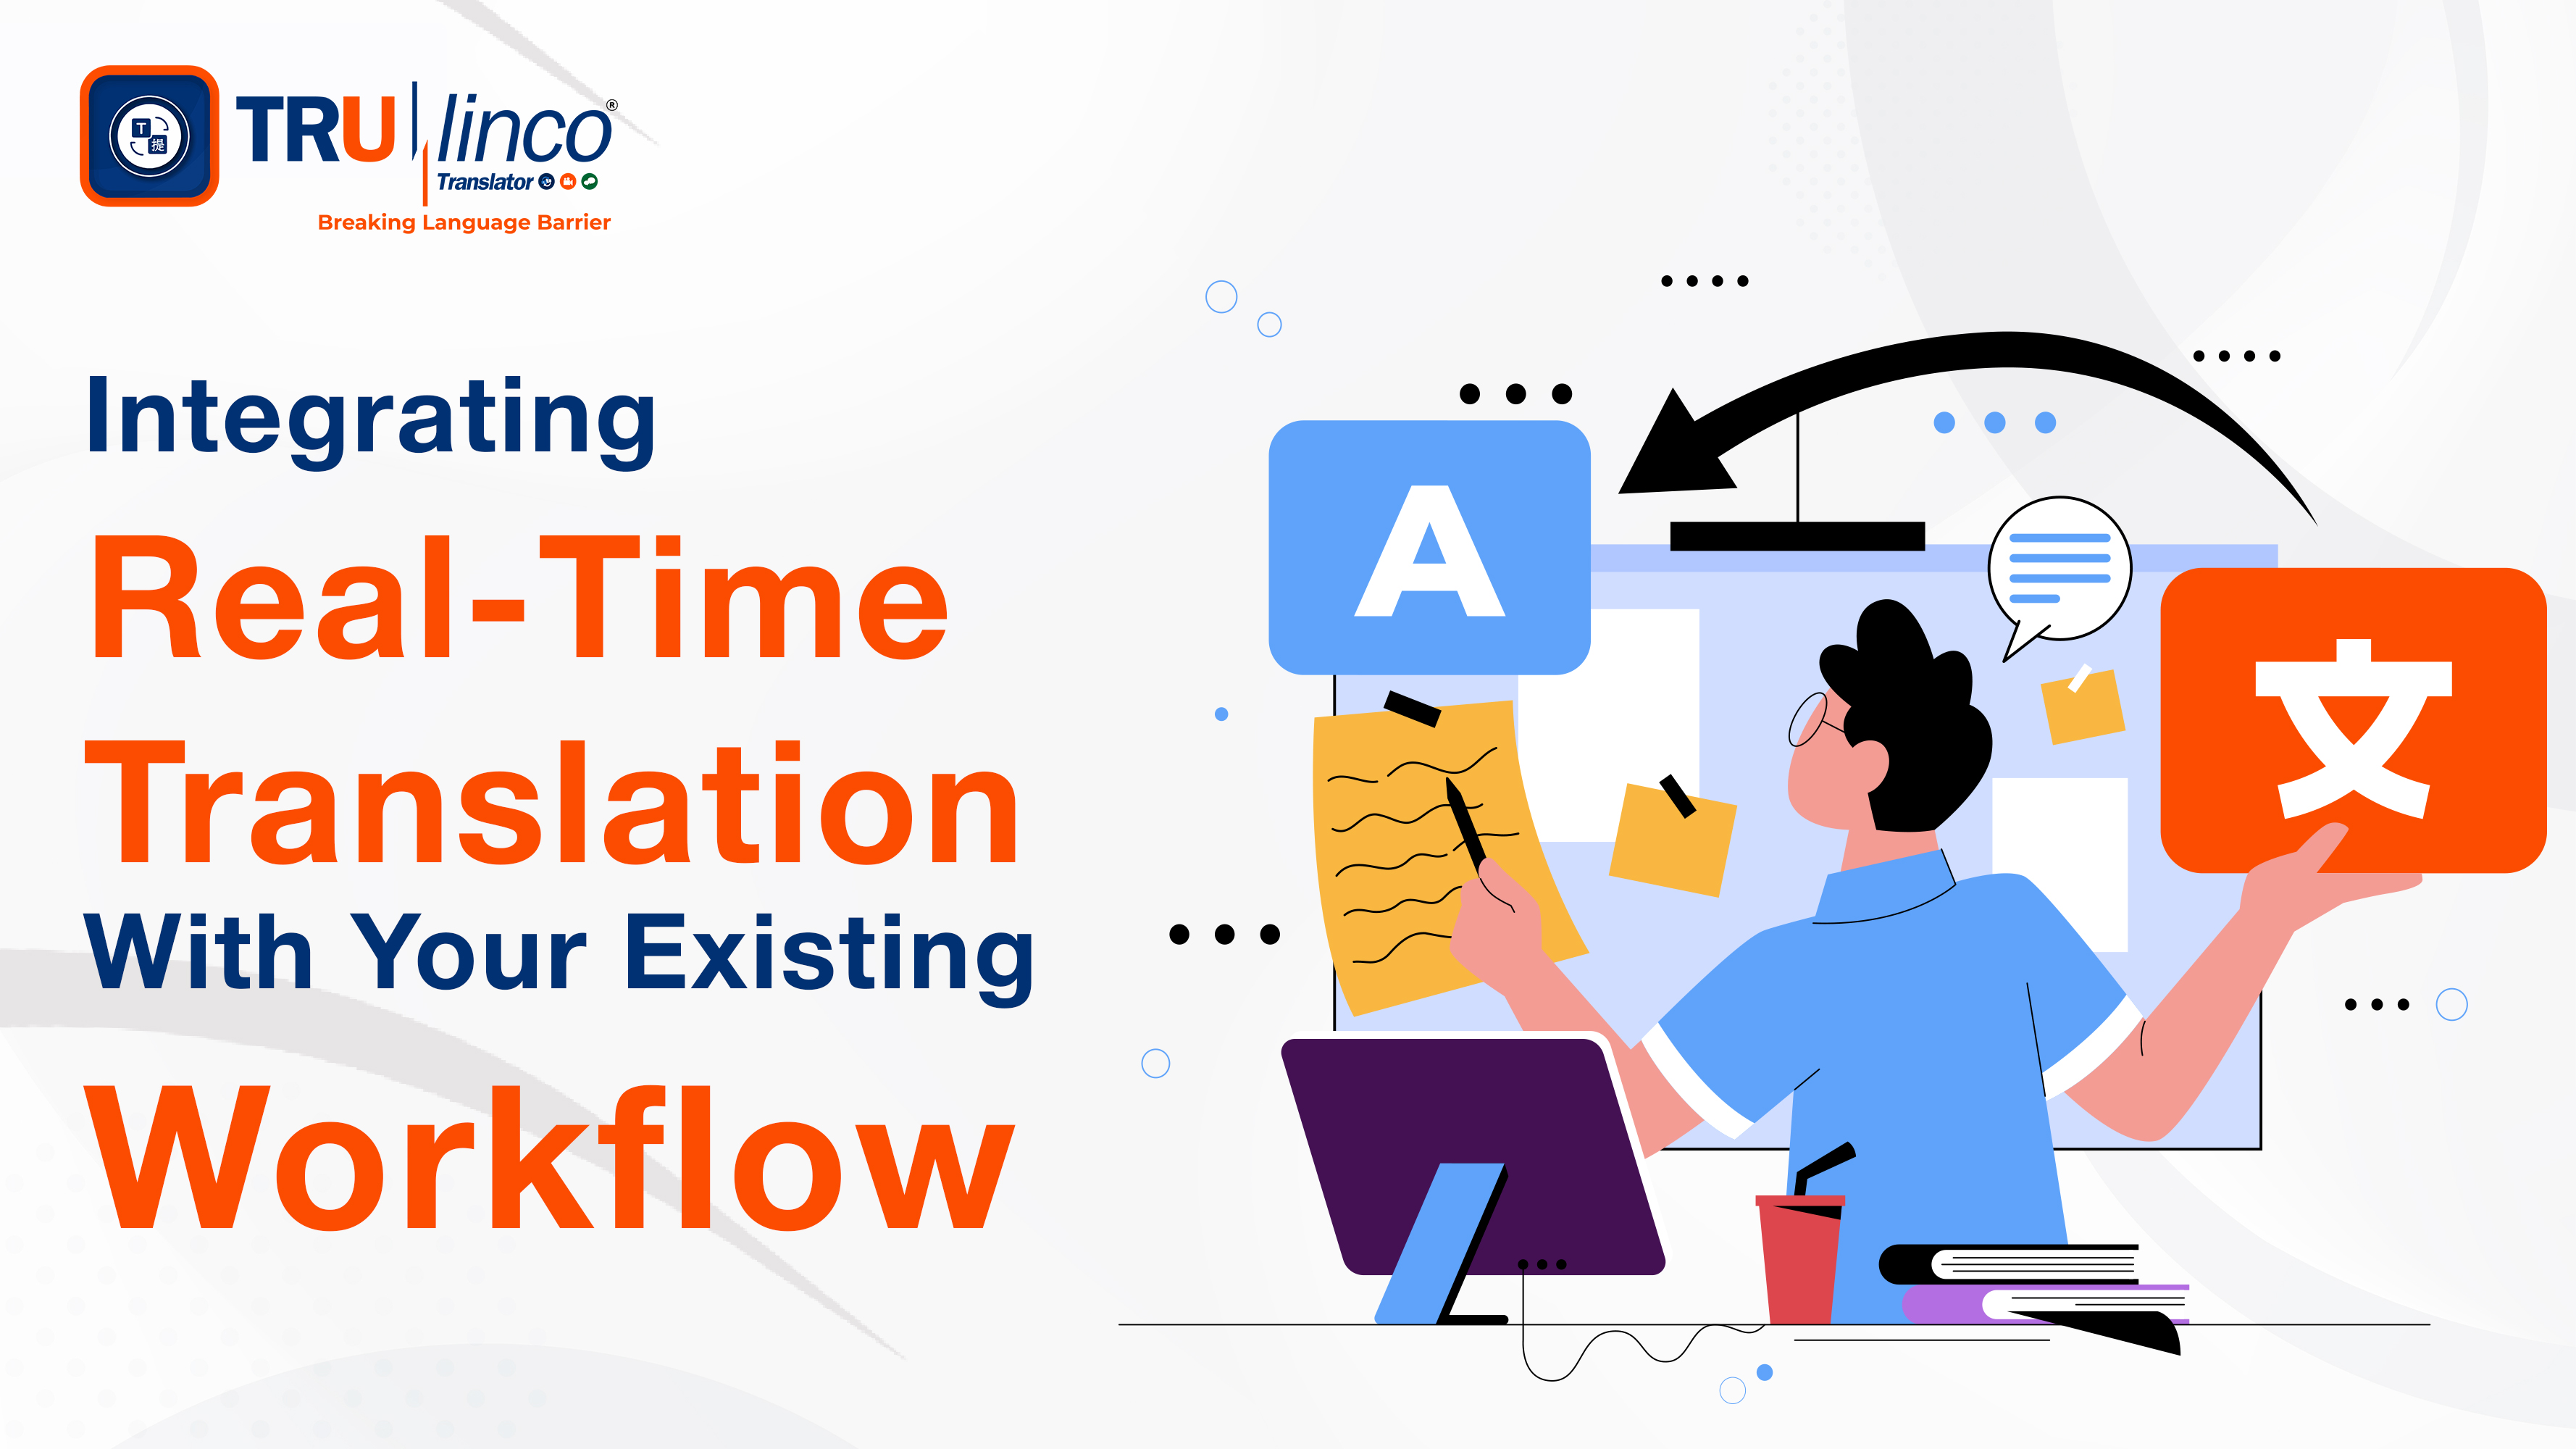 Integrating Real-Time Translation with Your Existing Workflow